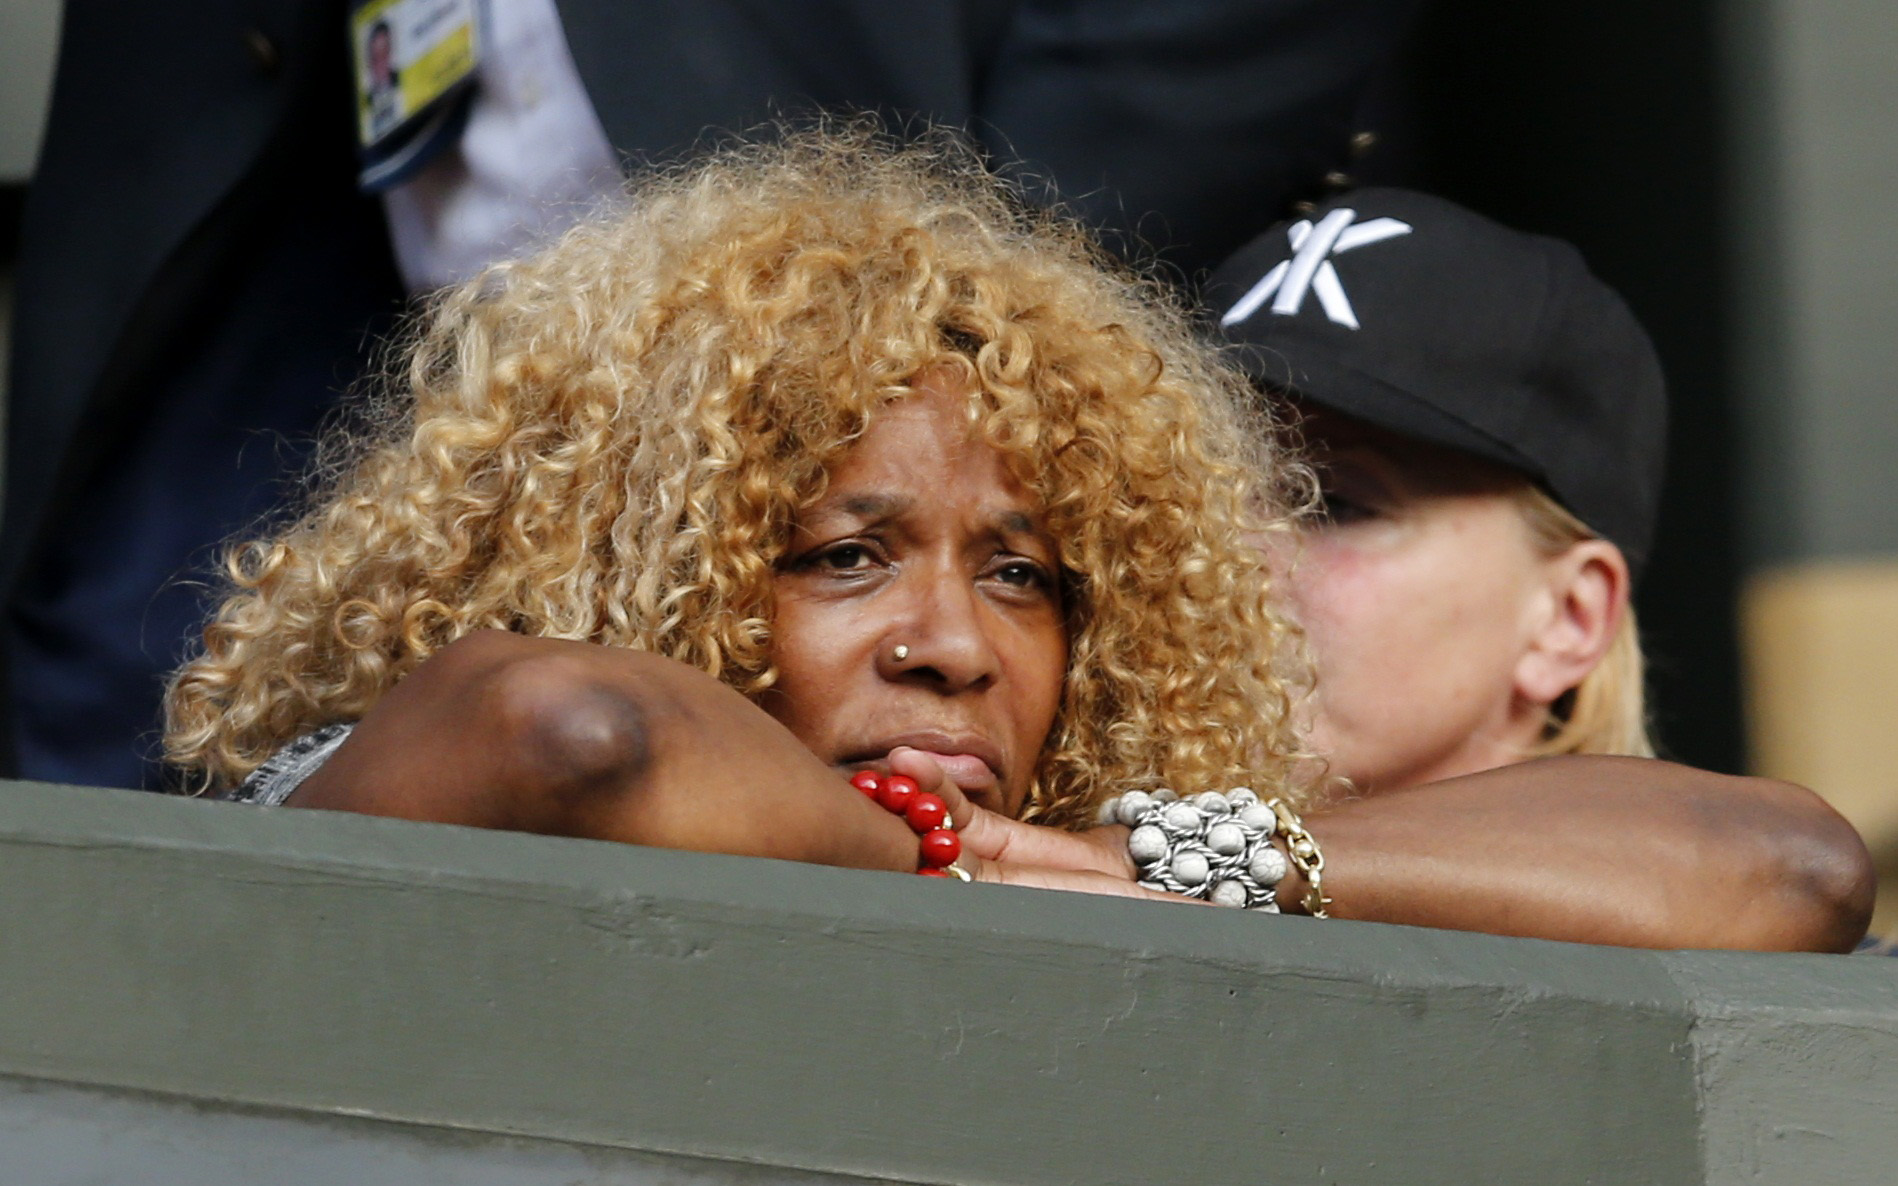 Oracene Price, mother of Serena Williams of the U.S.A. watches during her match against Heather Watson of Britain at the Wimbledon Tennis Championships in London, July 3, 2015. REUTERS/Suzanne Plunkett